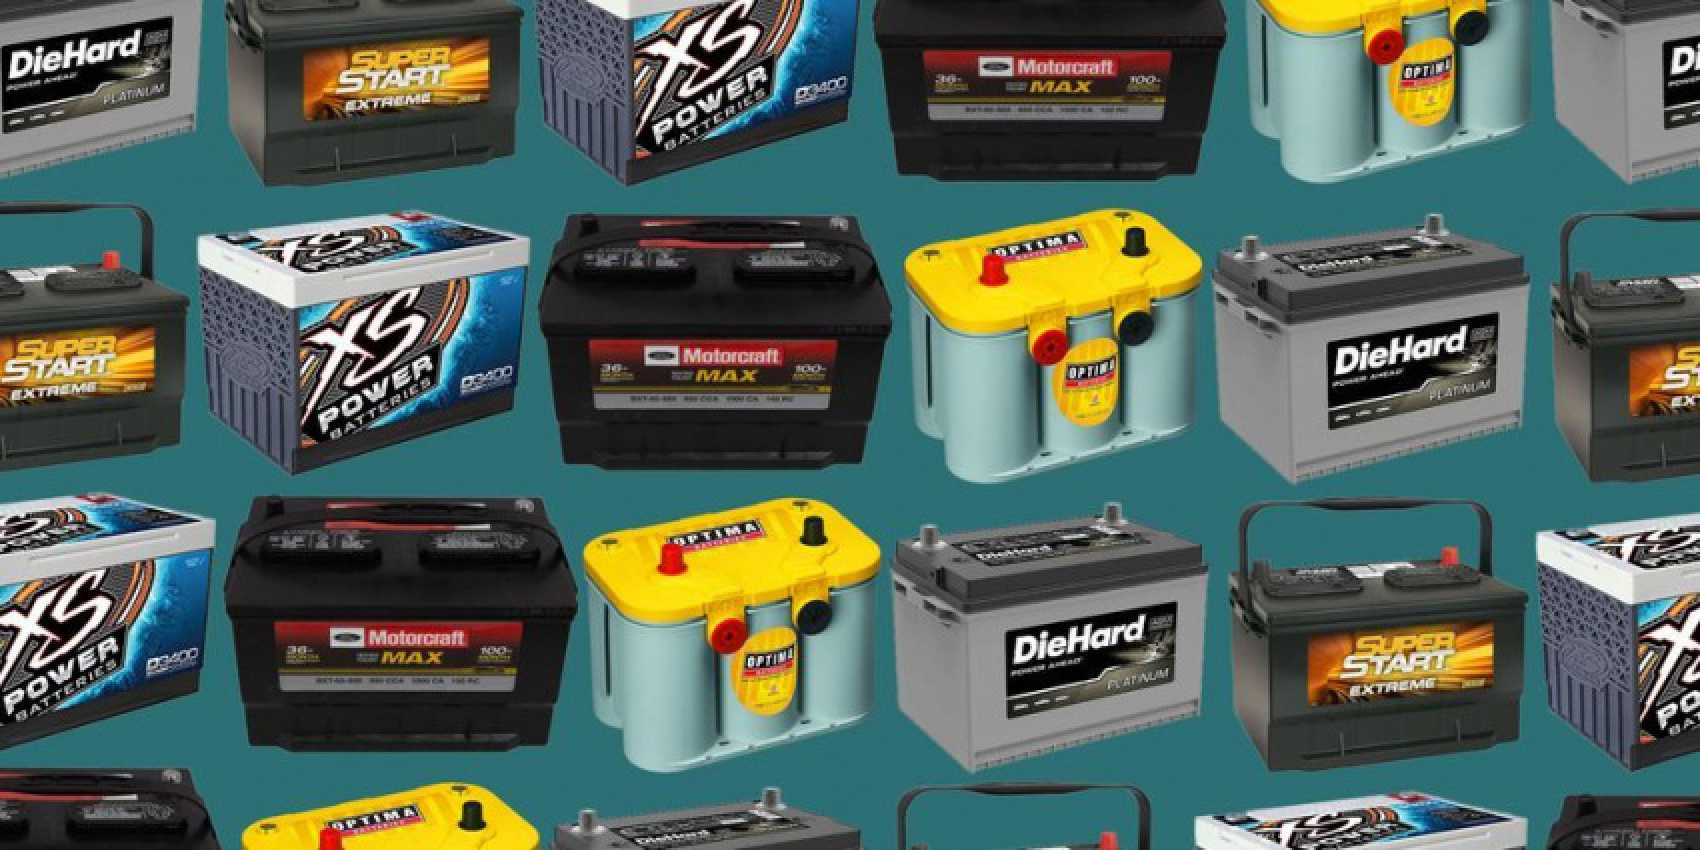 autos, cars, how to, reviews, banner batteries, car battery malaysia, car battery replacement malaysia, how-to, insights, varta, yuasa, how to, car batteries: types of batteries, how to choose the right battery and when to change your battery?